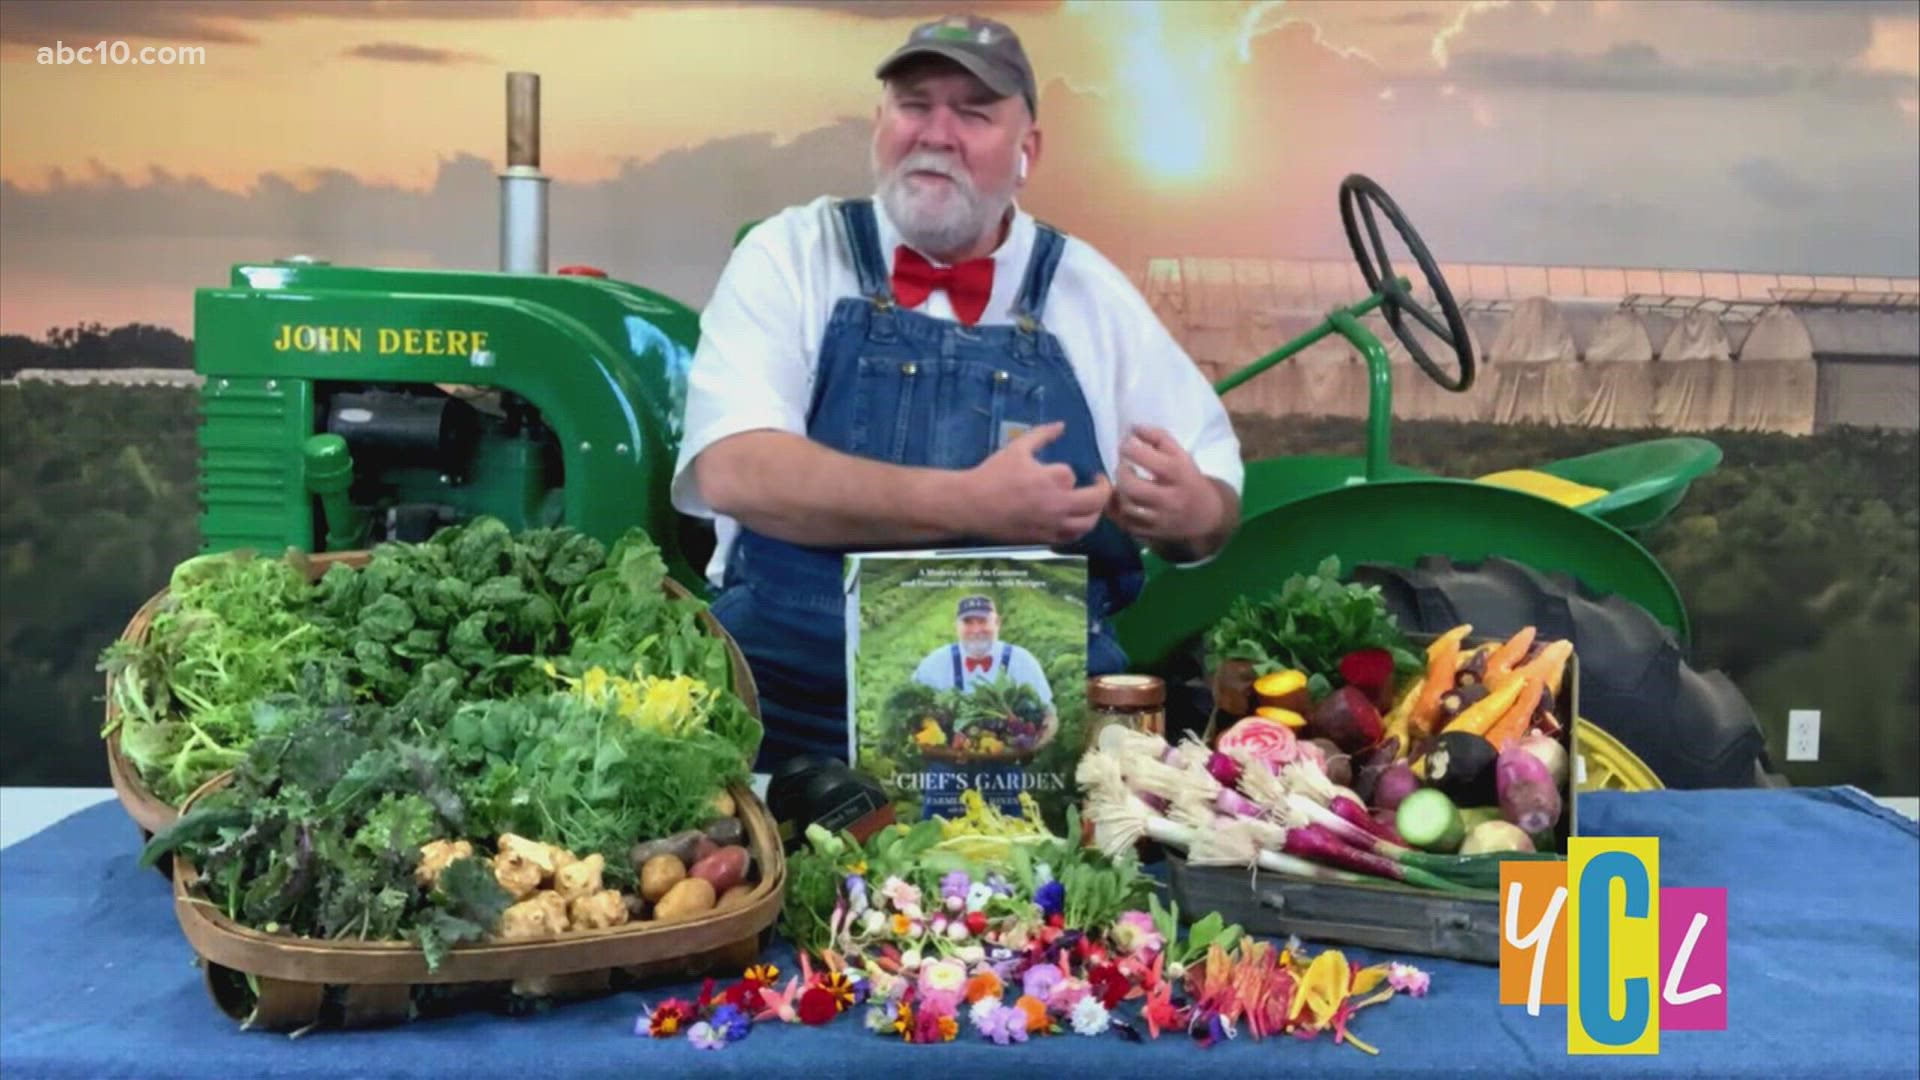 Farmer Lee Jones is known for his red bowtie, jean overalls and his passion for veggies! He shares what produce is in season and better vegetables for a health you.